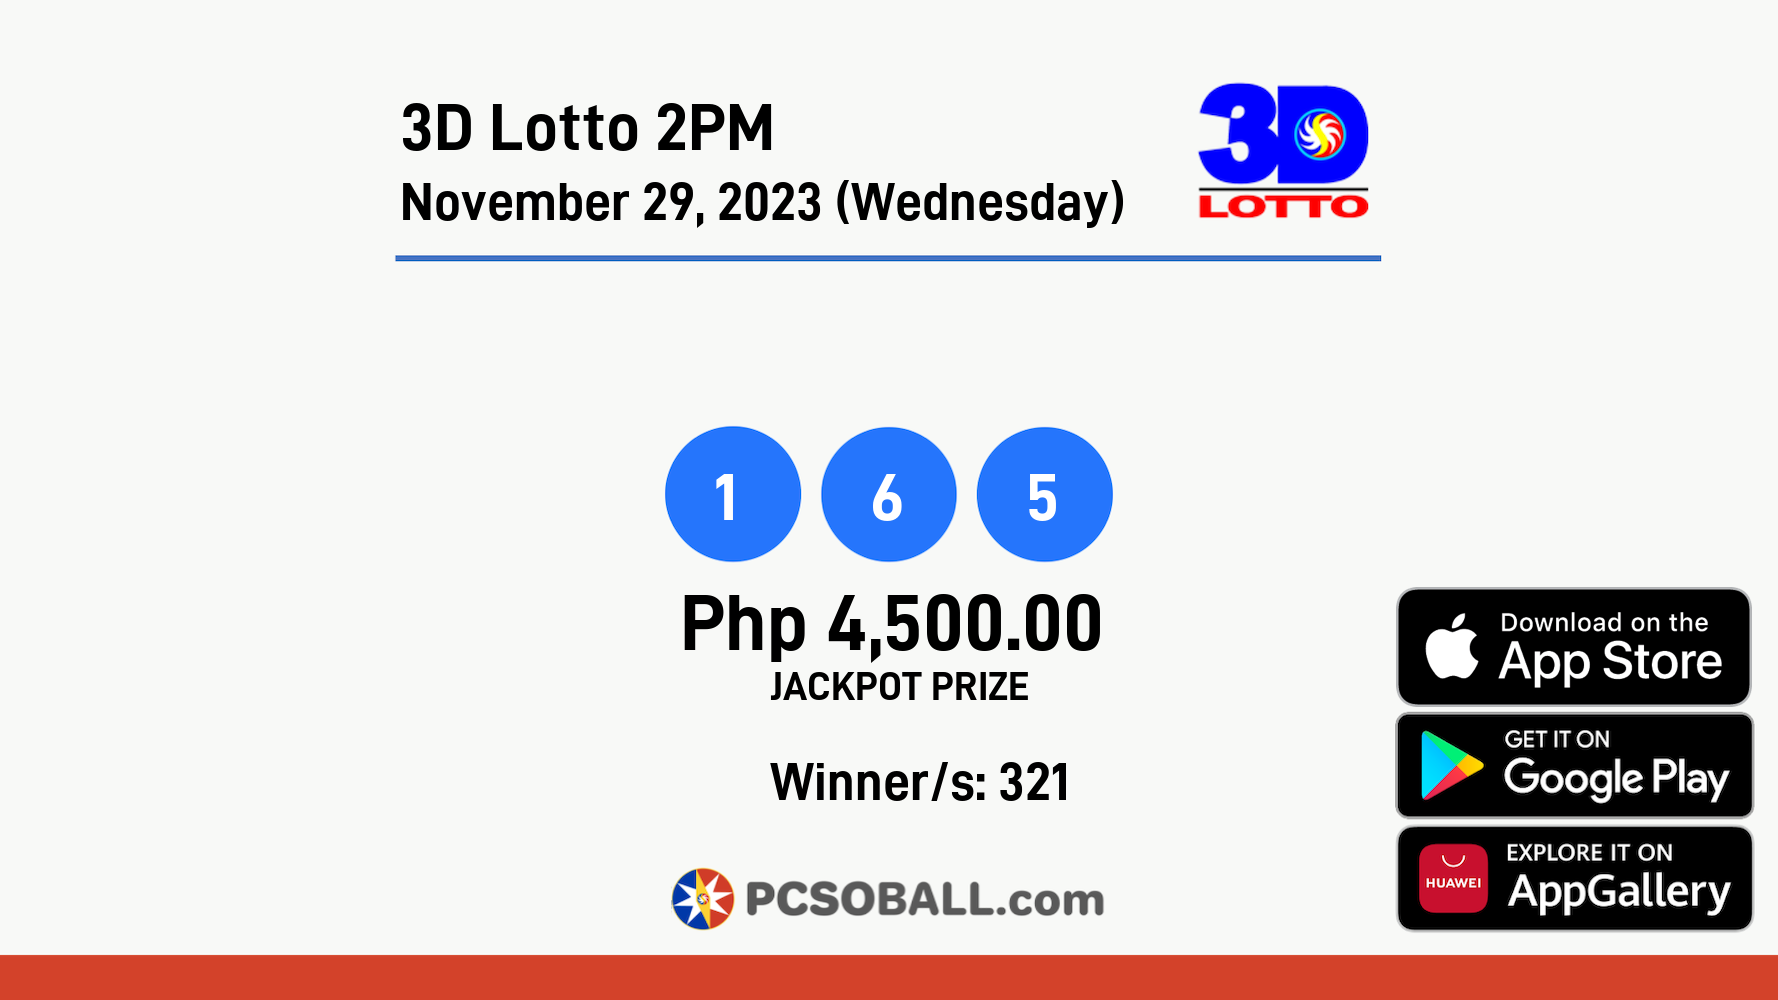 3D Lotto 2PM November 29, 2023 (Wednesday) Result